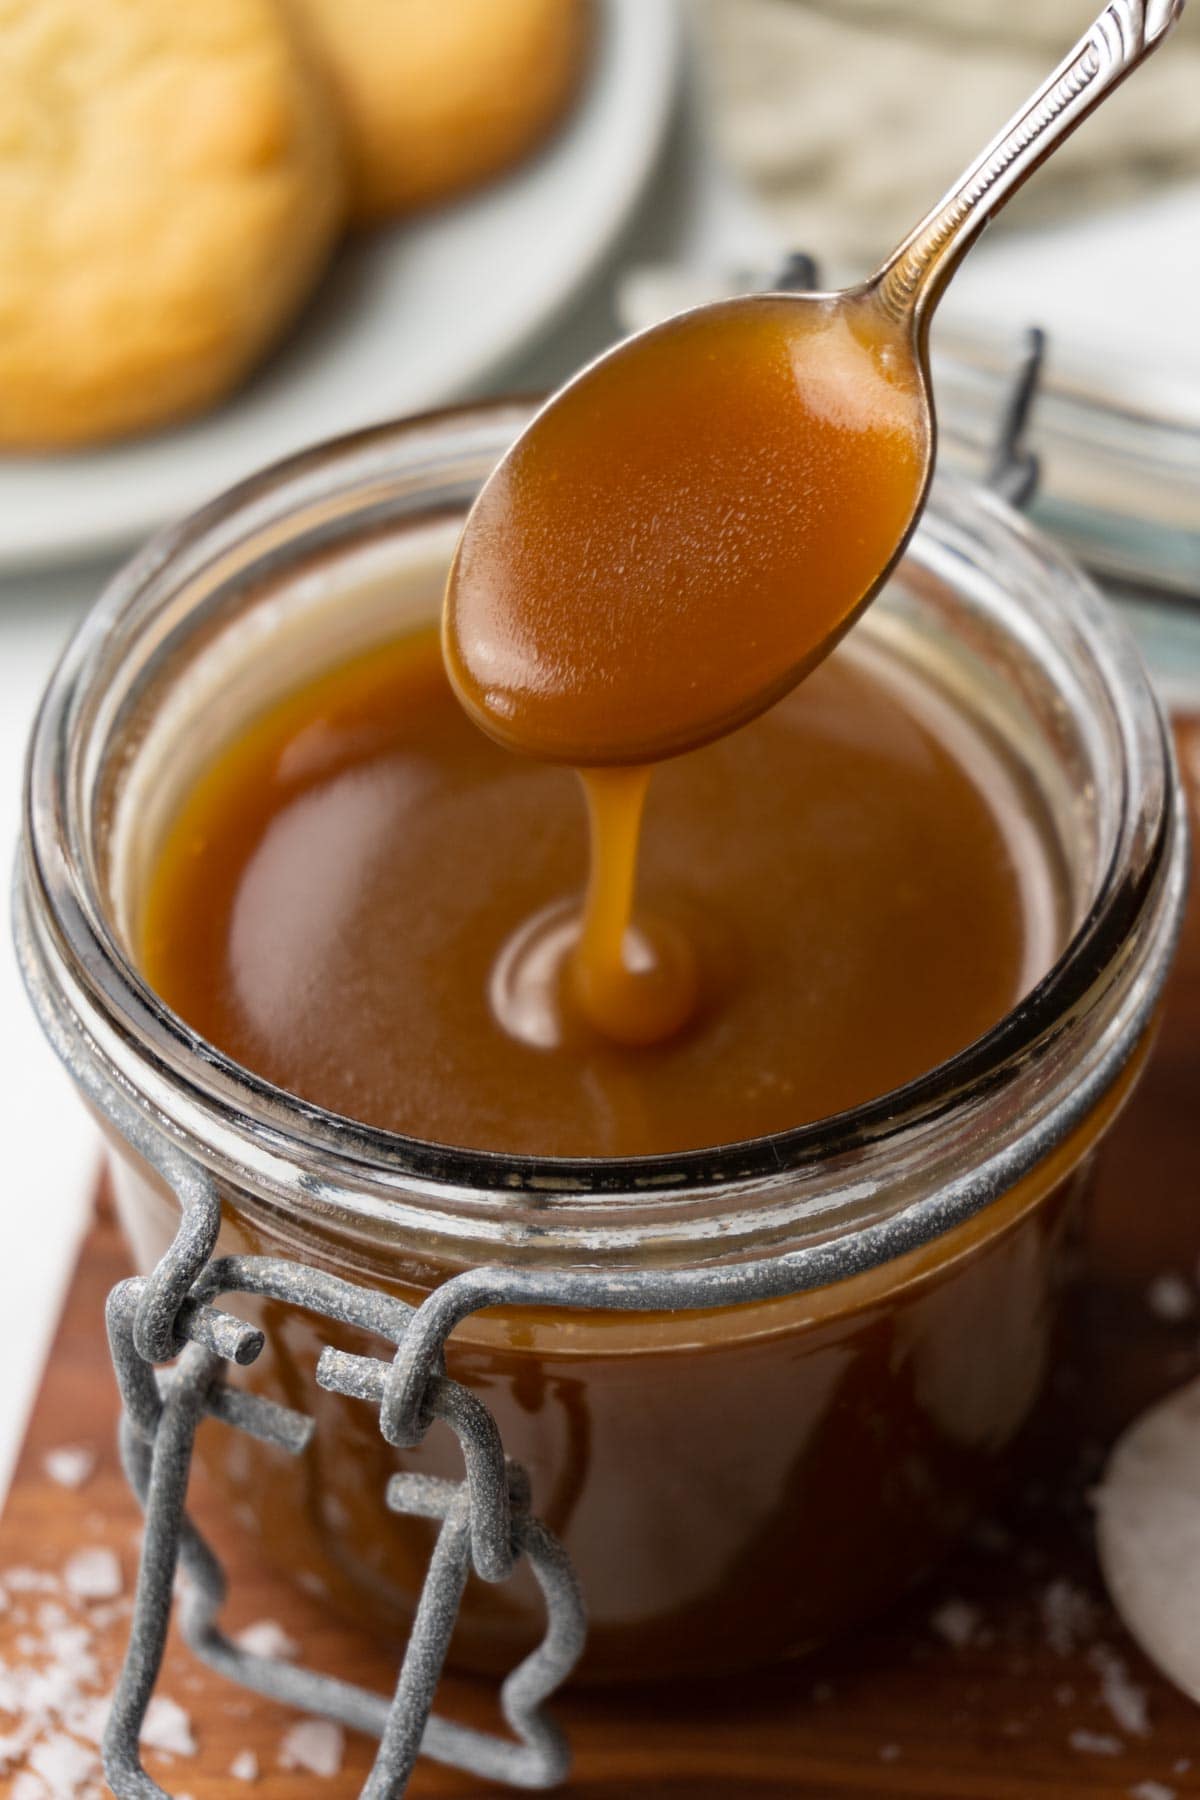 A glass jar filled with butterscotch sauce on a wooden board. A silver spoon is spooning out some sauce from the jar.